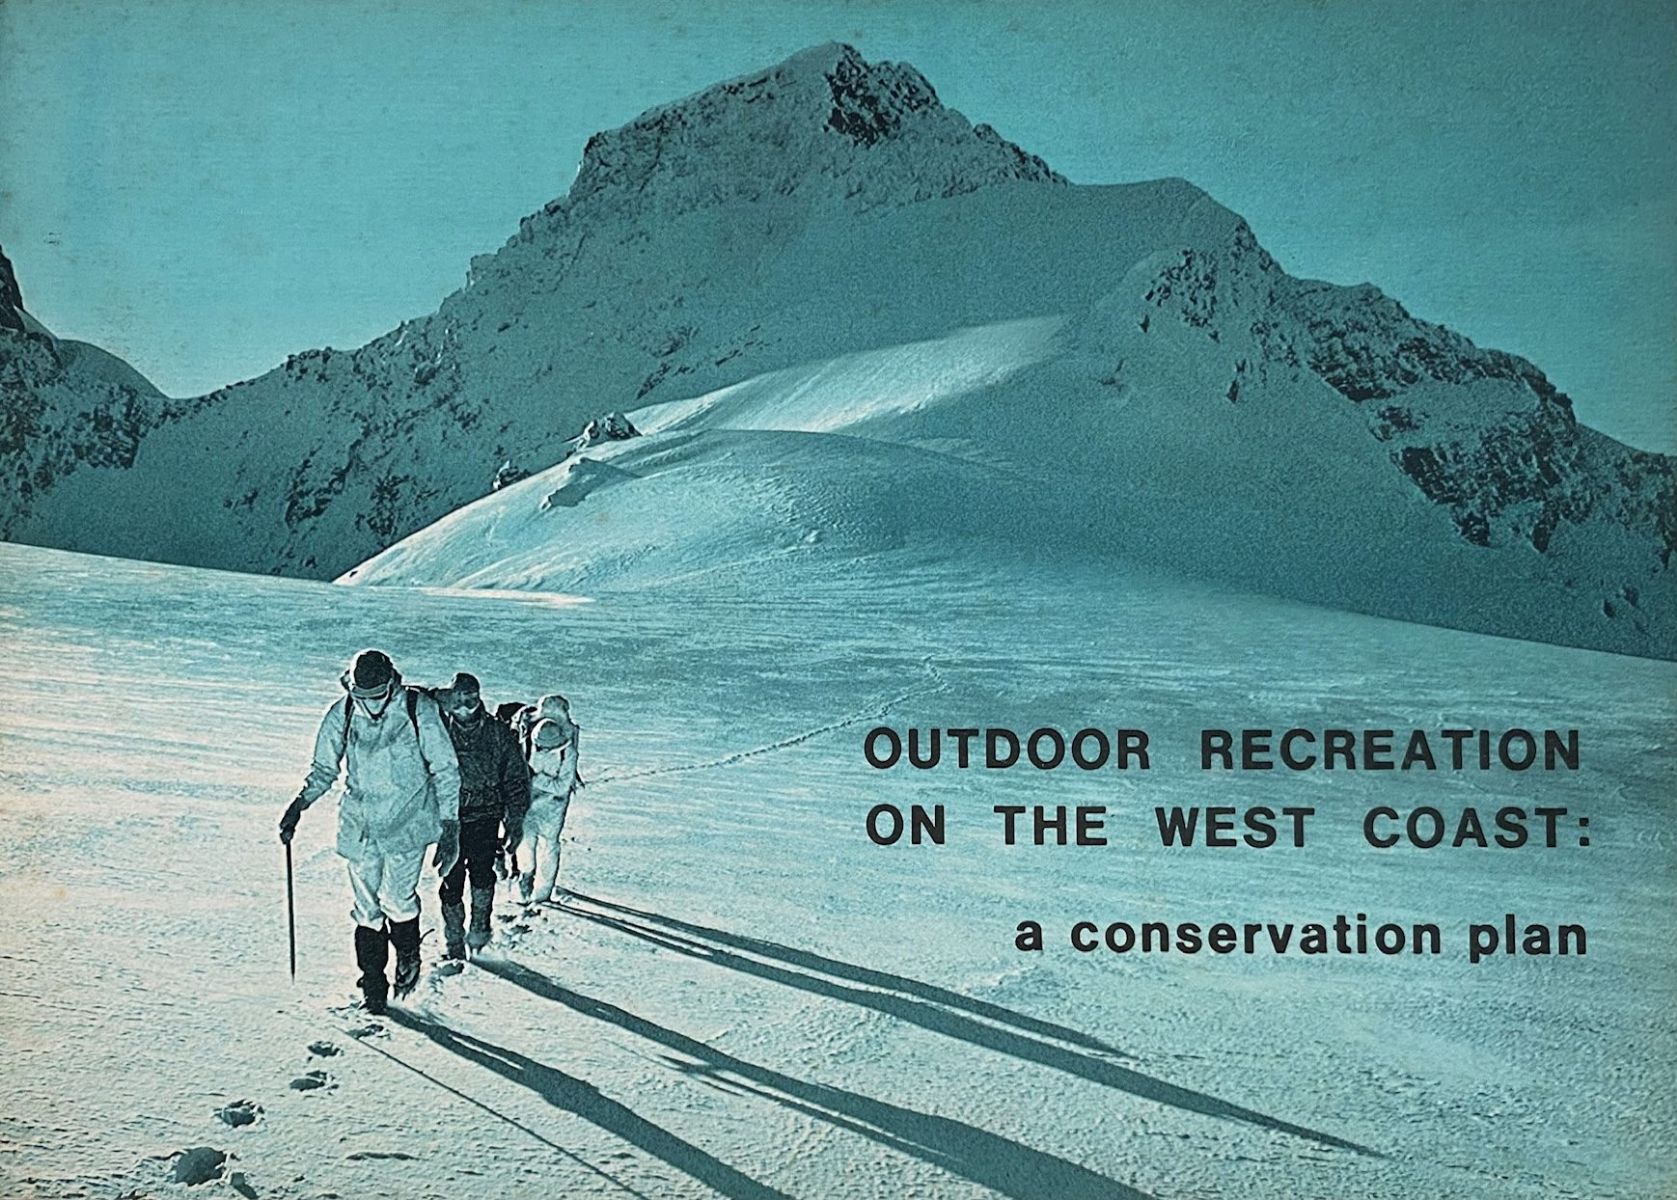 OUTDOOR RECREATION ON THE WEST COAST: A Conservation Plan